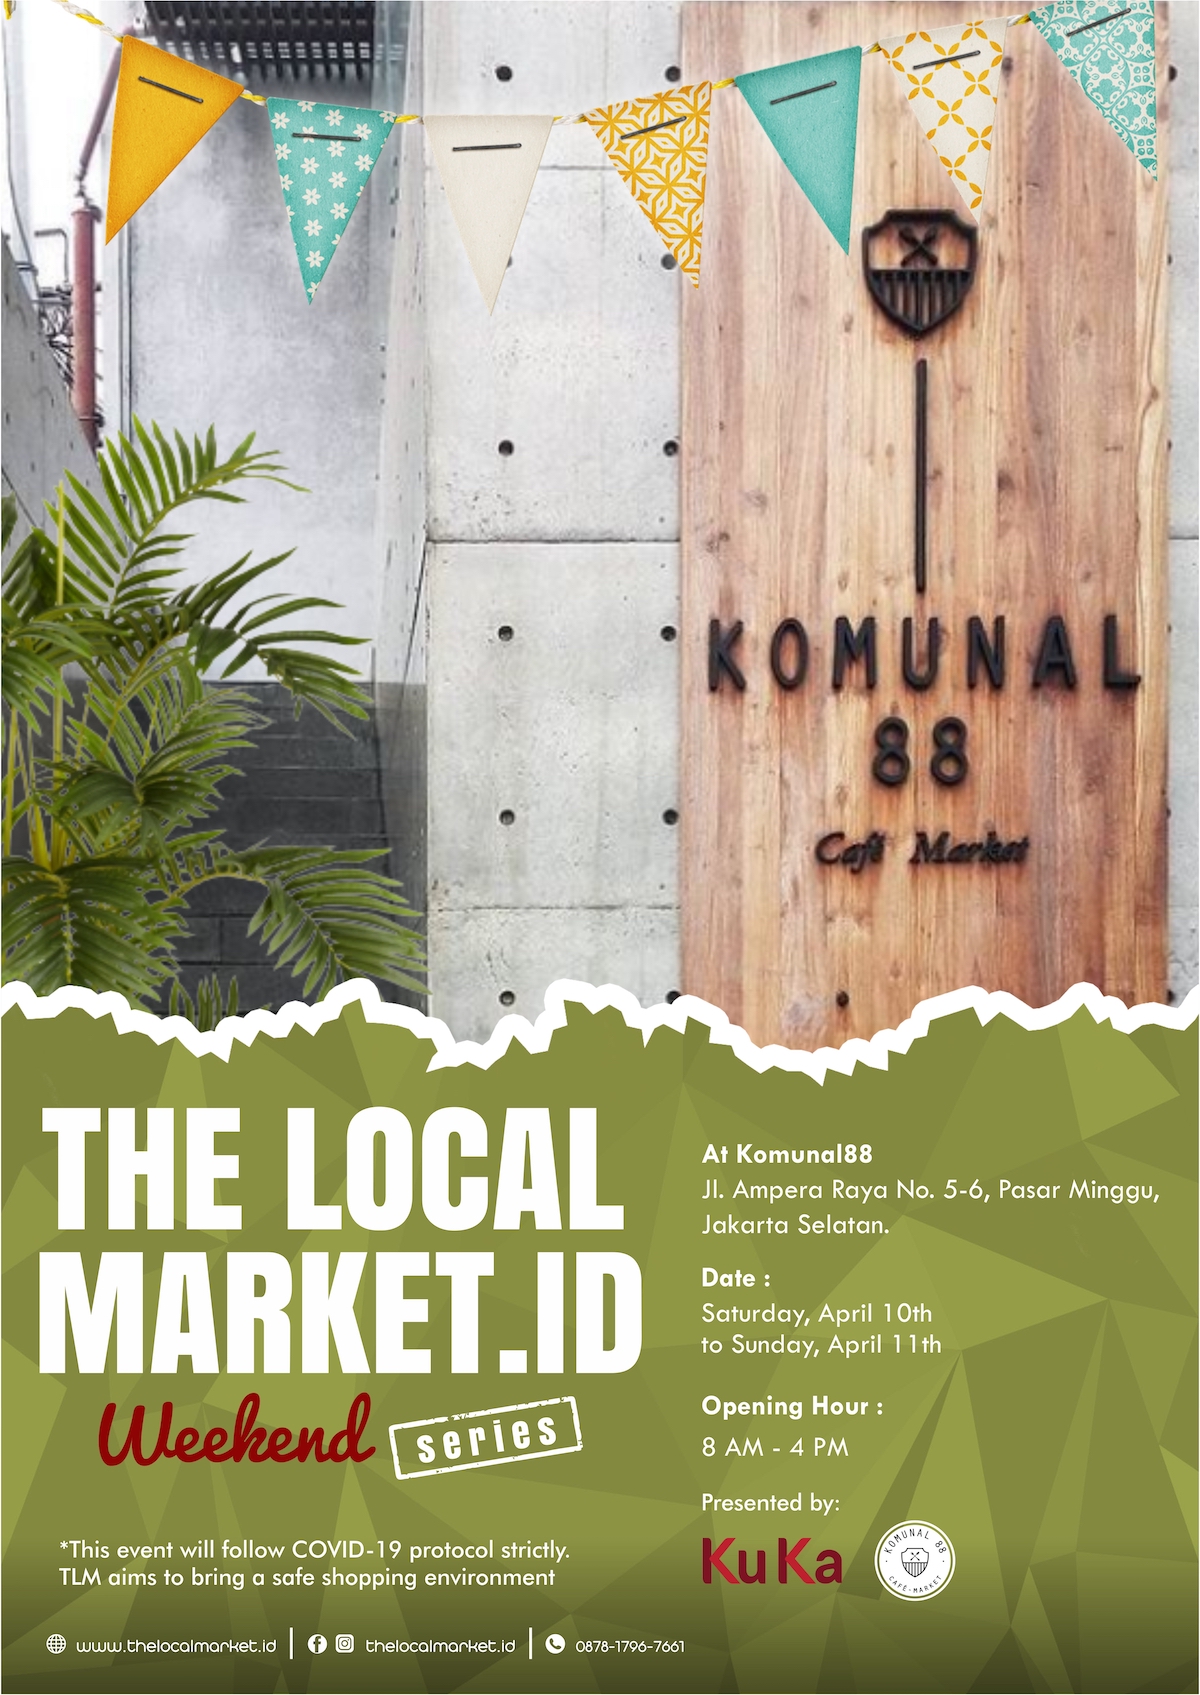 The Local Market - Weekend Series (April 2021)